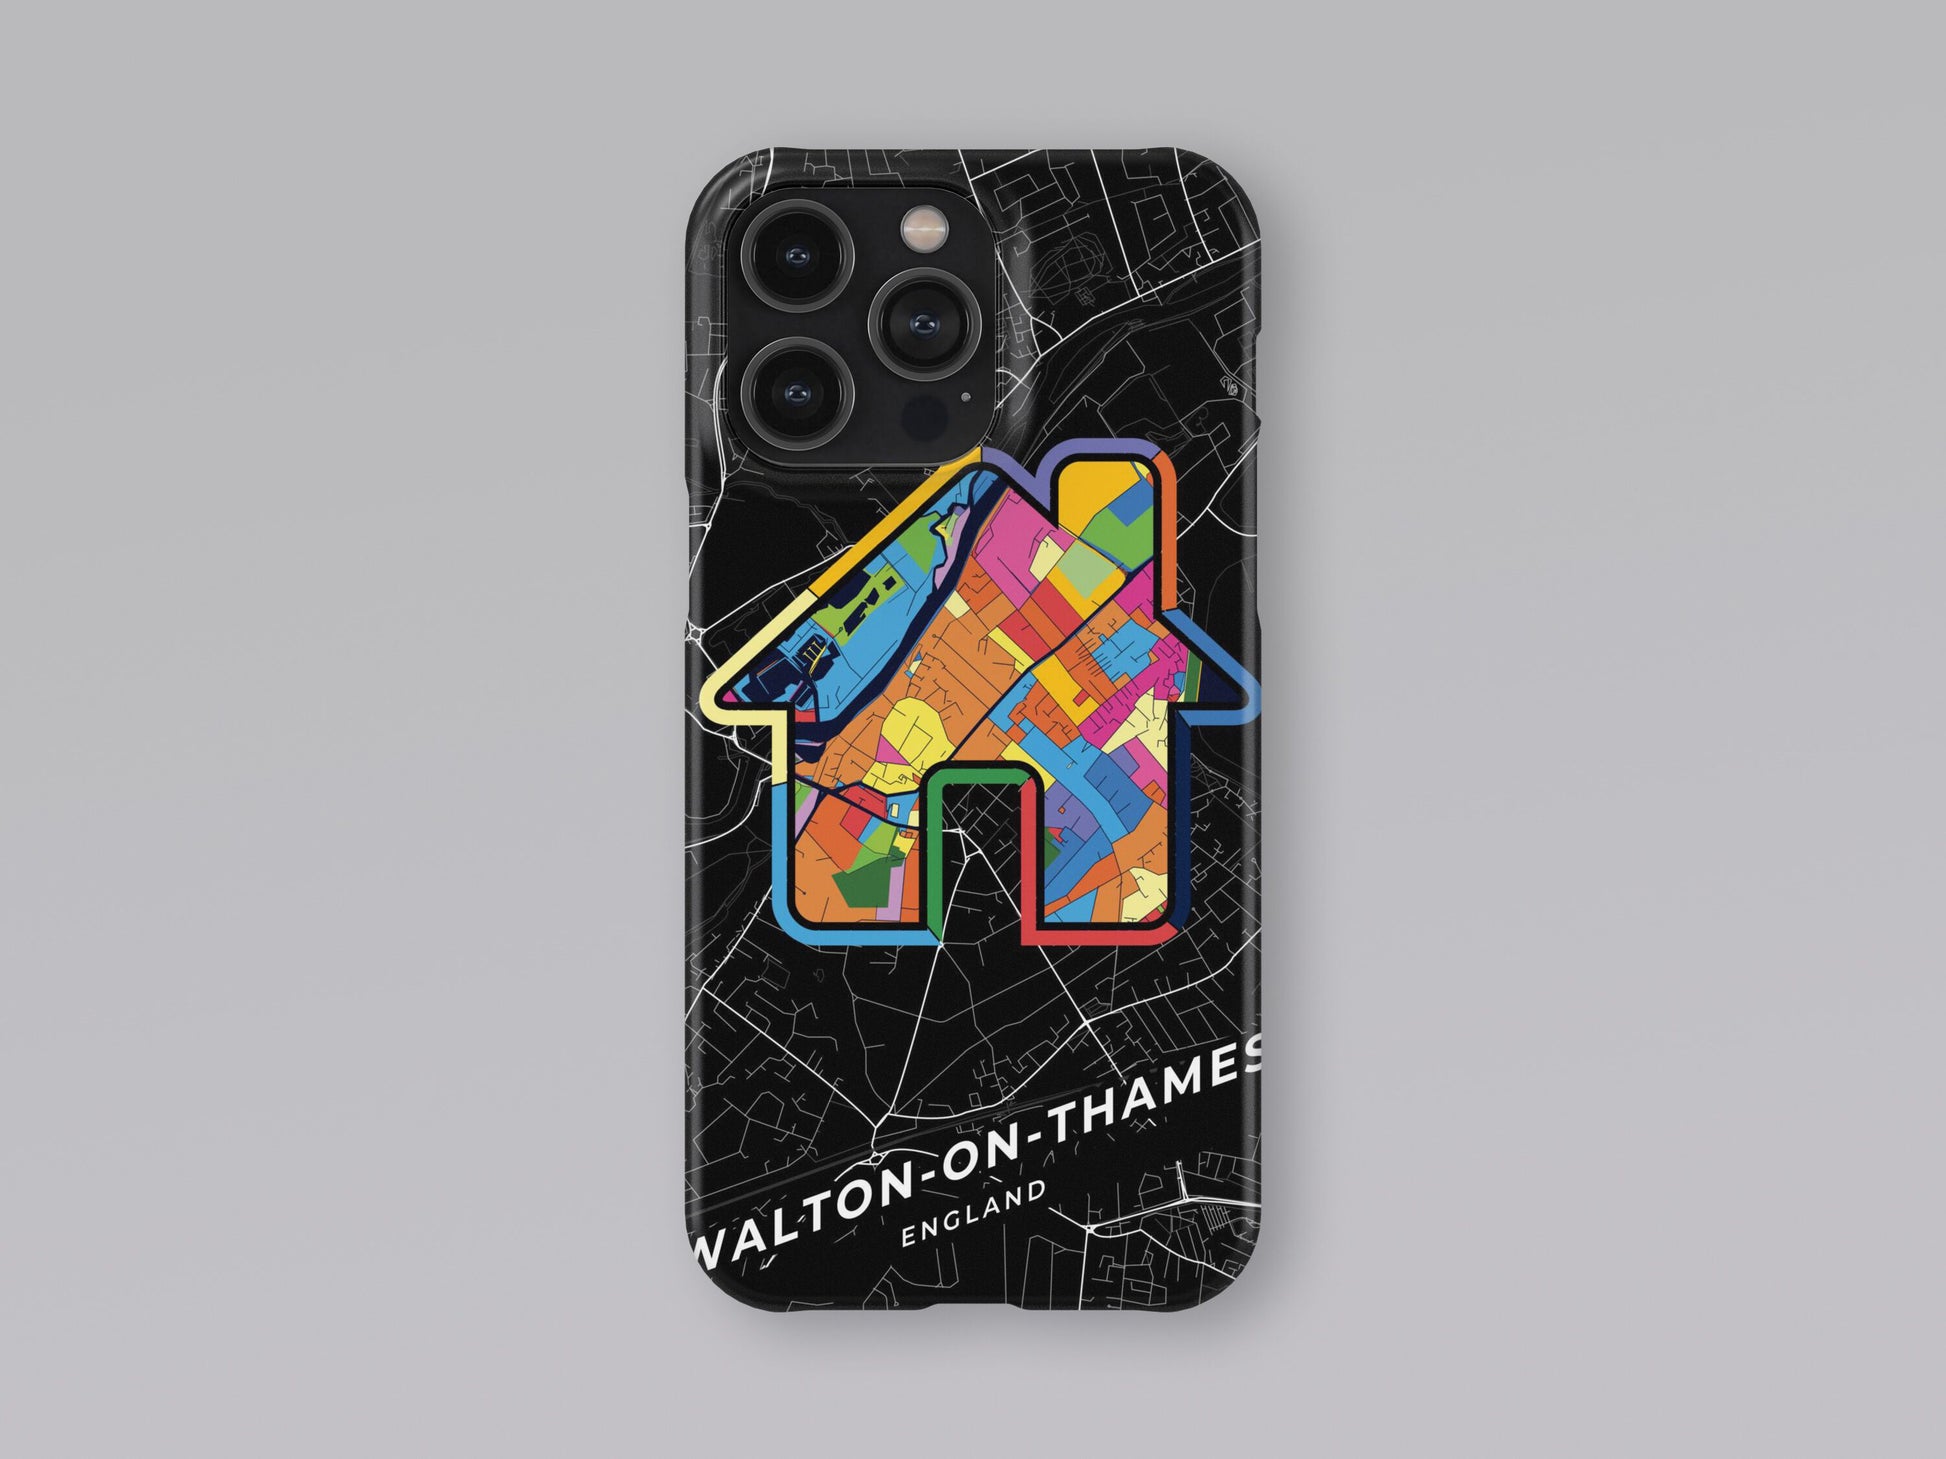 Walton-On-Thames England slim phone case with colorful icon 3